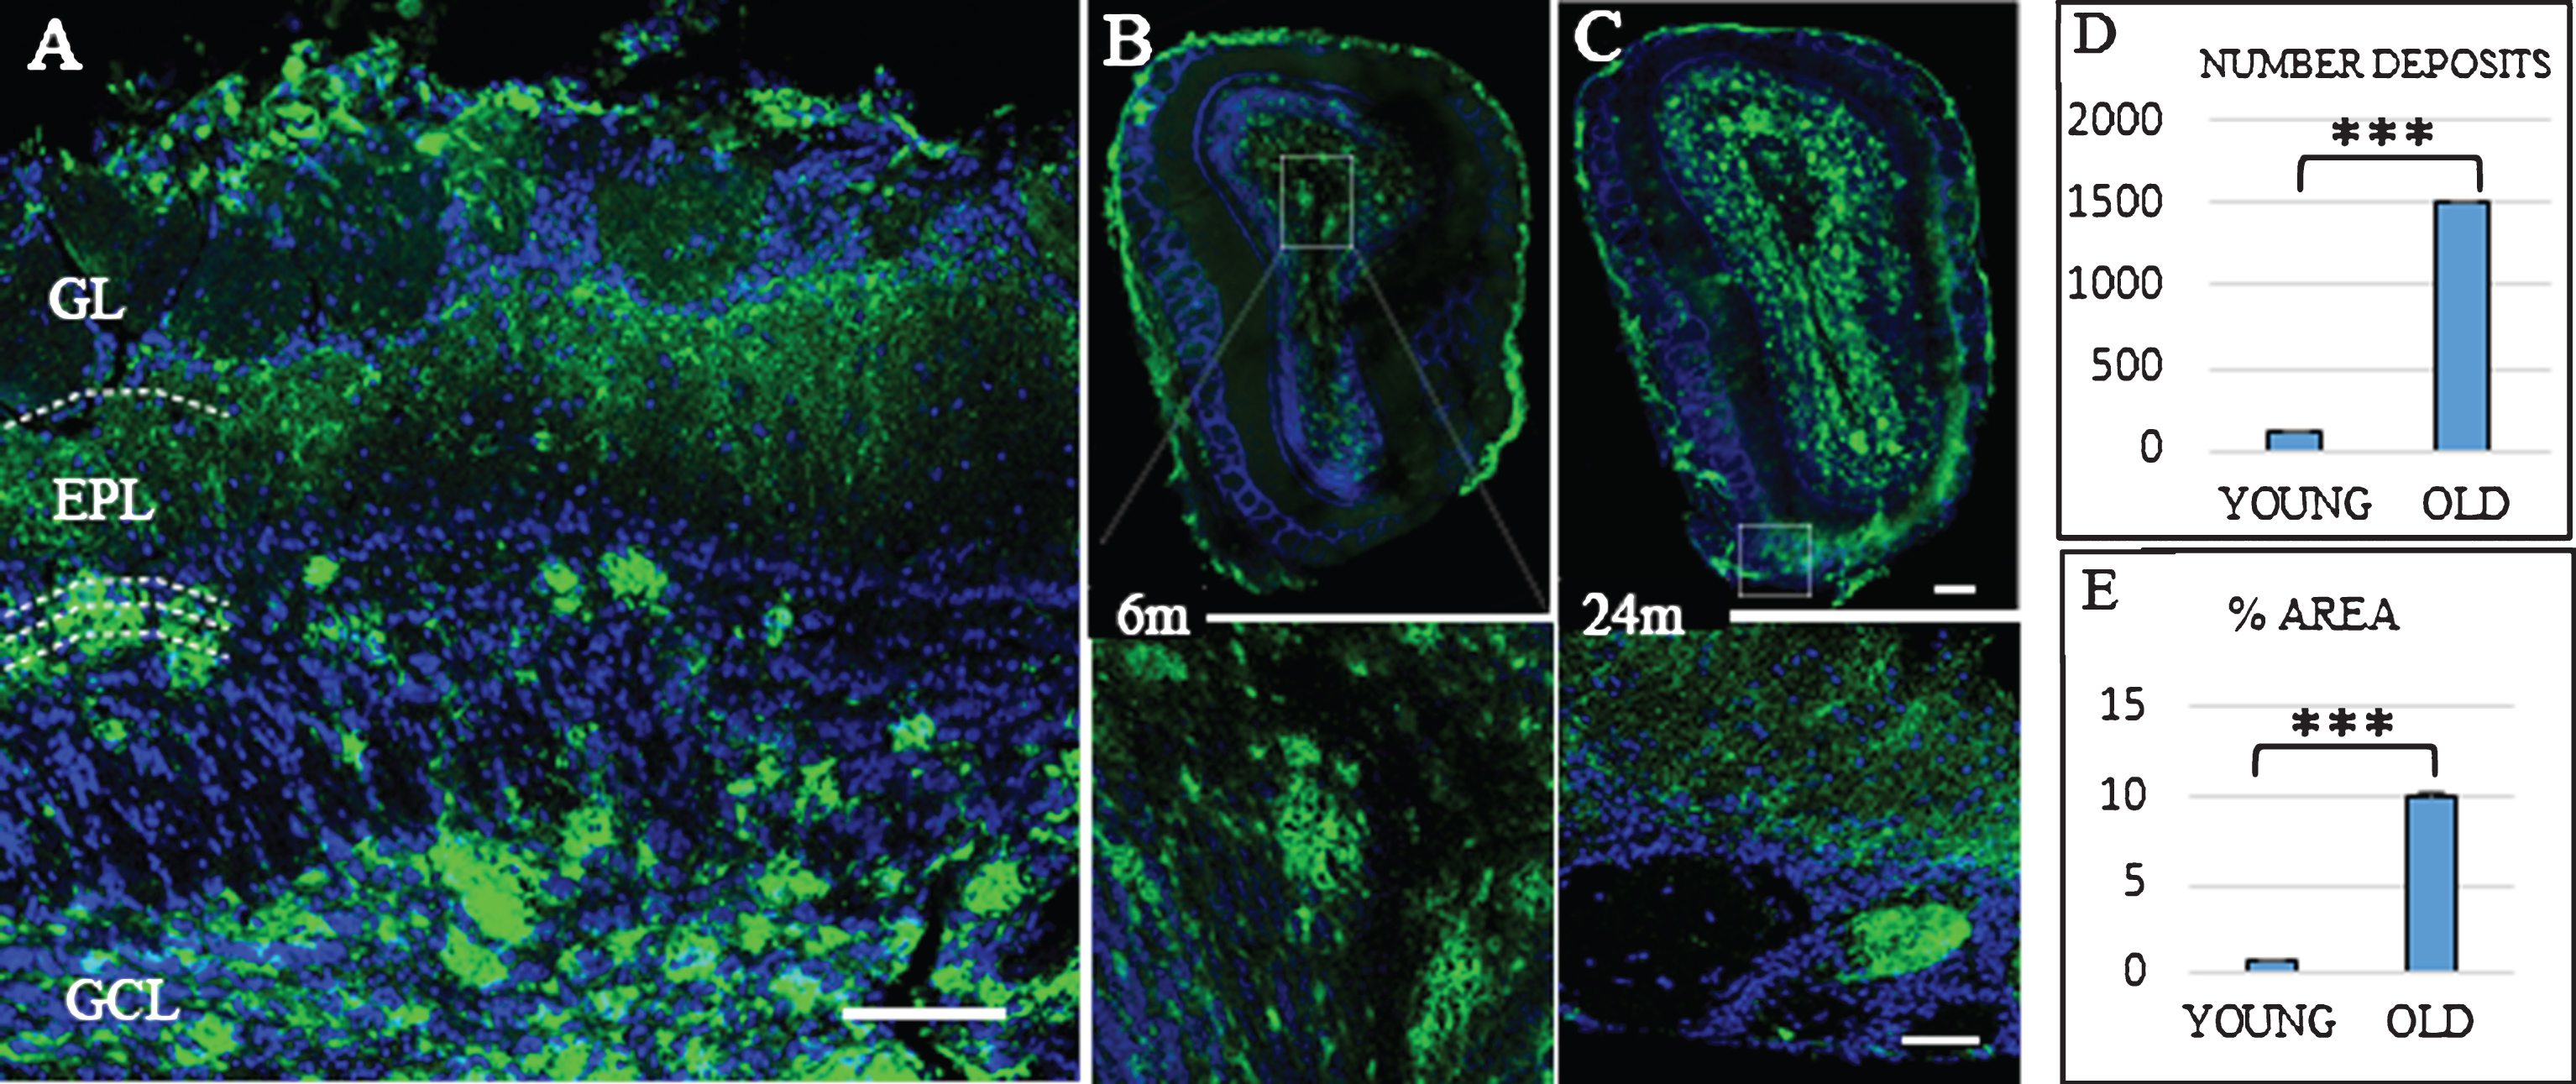 Distribution Aβ-deposits in APPswe/PS1dE9 mice in olfactory bulb (OB) at different ages. A) Localization of Aβ-deposits throughout the different layers (GL, glomerular layer; EPL, external plexiform layer; GCL, granular Cell layer) of the OB in an old mouse. OB in 6-month-old (B) and 24-month-old mice (C). Anti-Aβ in green, and DAPI nuclear staining in blue. Bars, 50μm. D) t-test number of Aβ deposits in OB young (111.467±14.934) versus old (1510.733±72.113) ***p < 0.001. E) t-test % area young (0.658±0.151) versus old (10.063±0.555) ***p < 0.001.